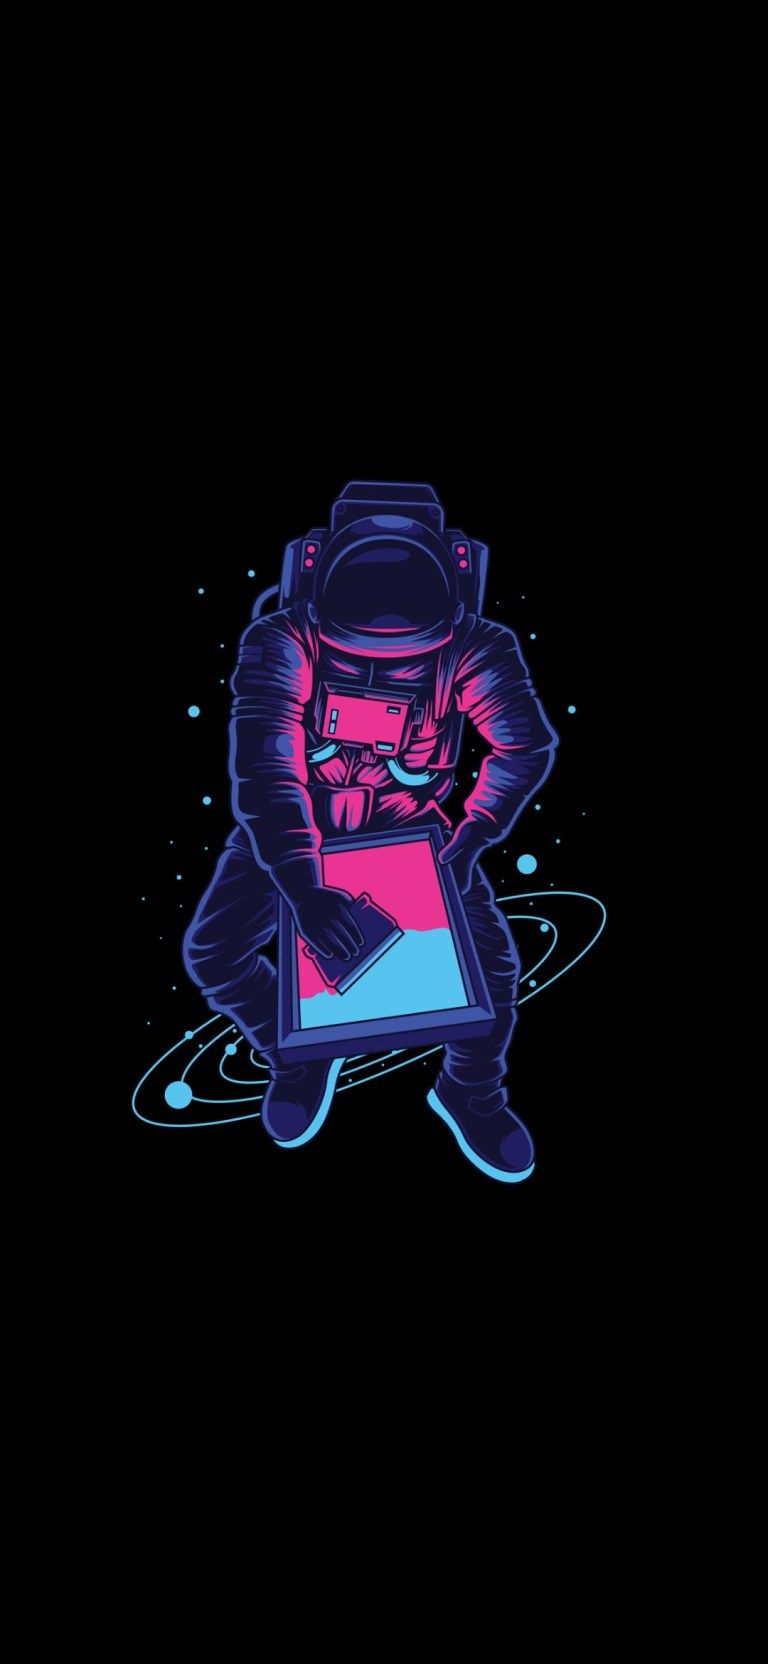 Phone Oled Space Wallpapers - Wallpaper Cave